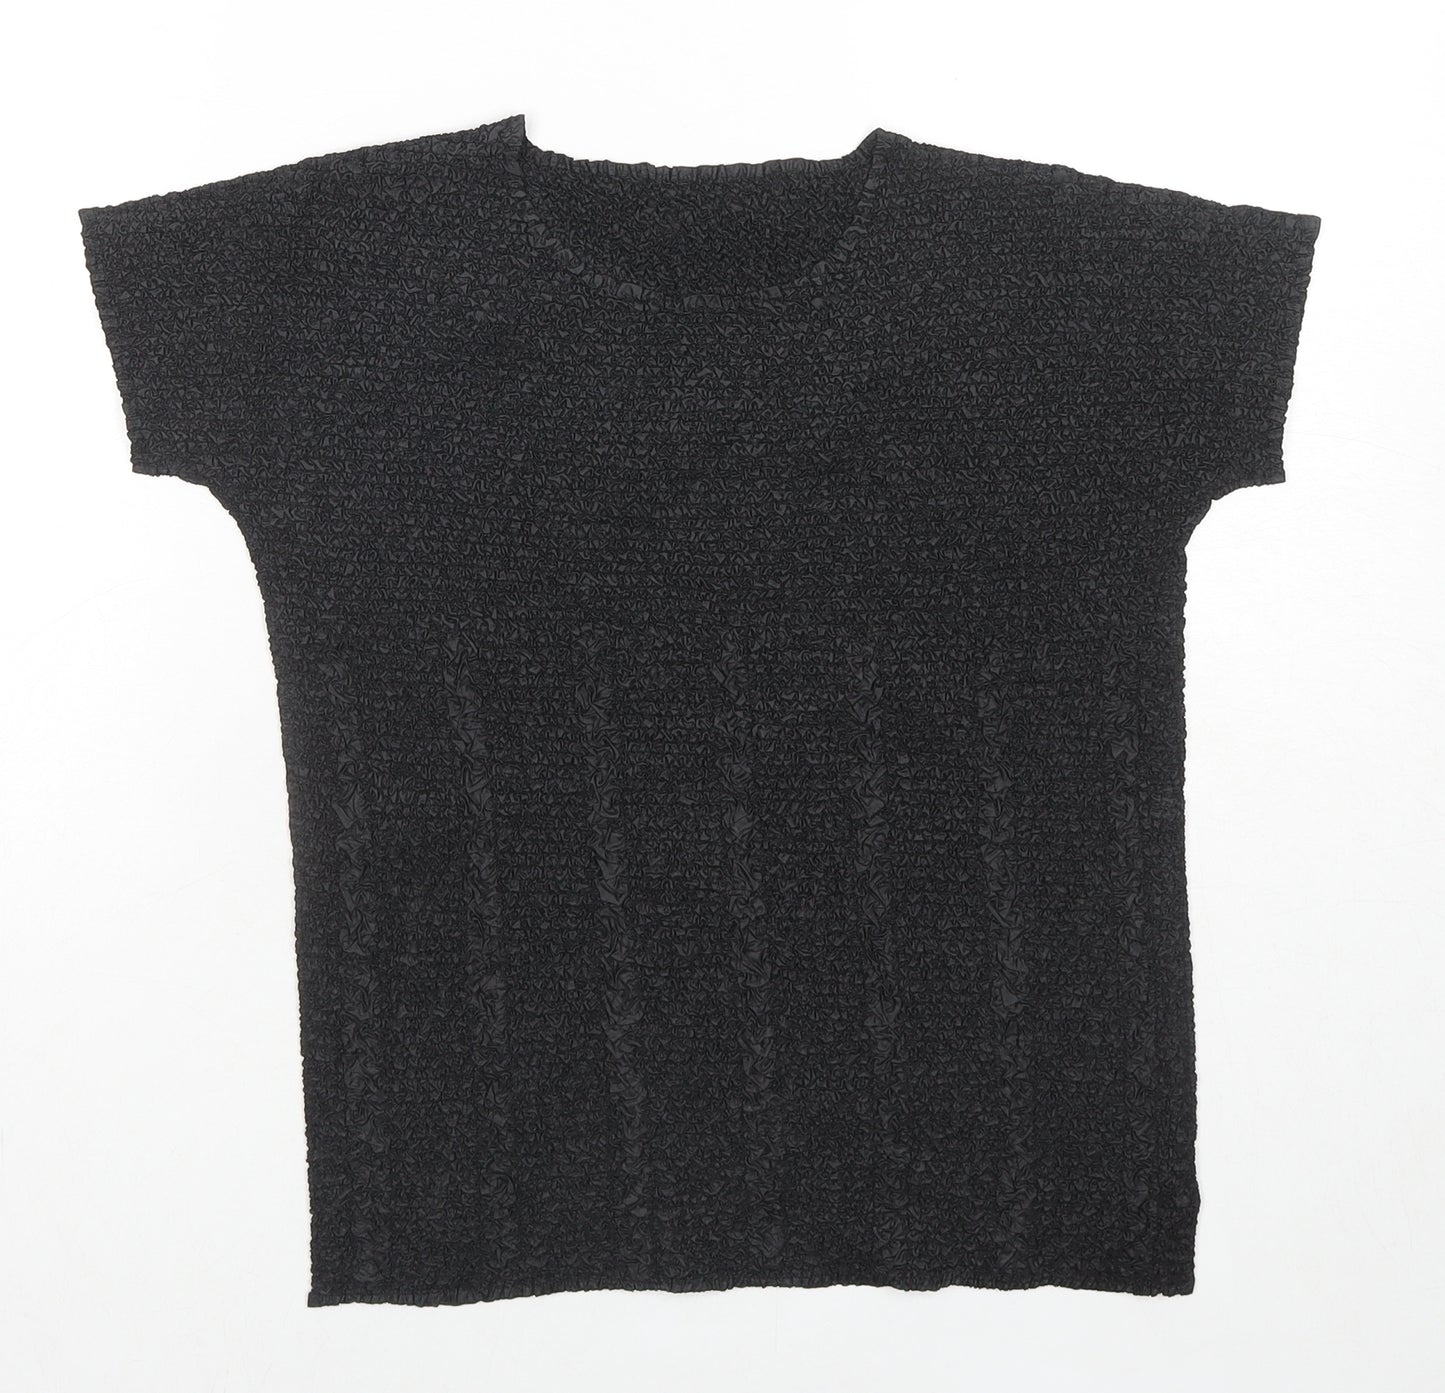 Marks and Spencer Womens Black Polyester Basic T-Shirt Size 16 Round Neck - Crinkle Look Size 16-18